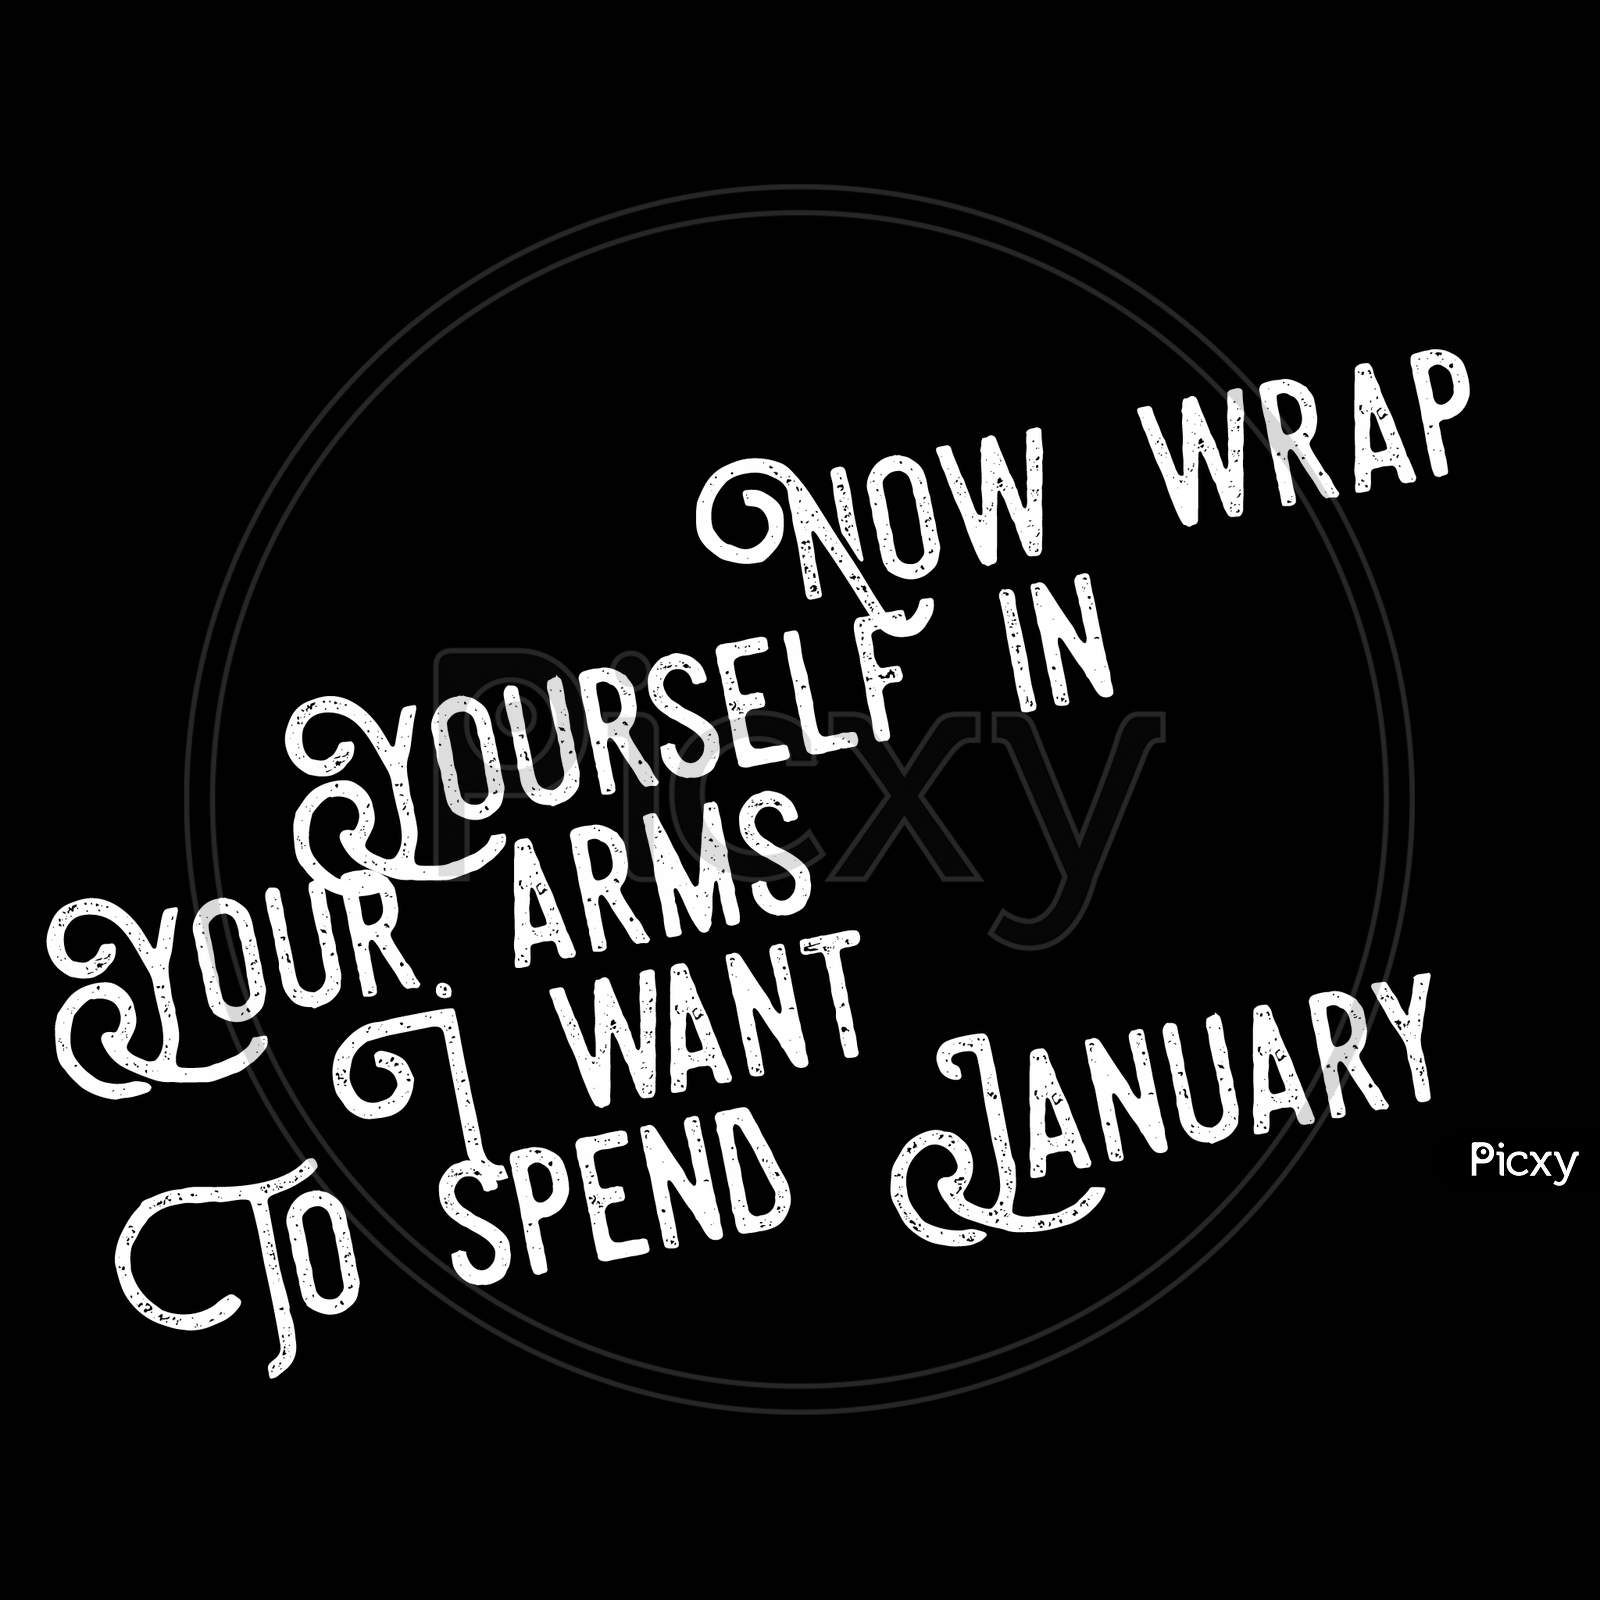 I want to spend January